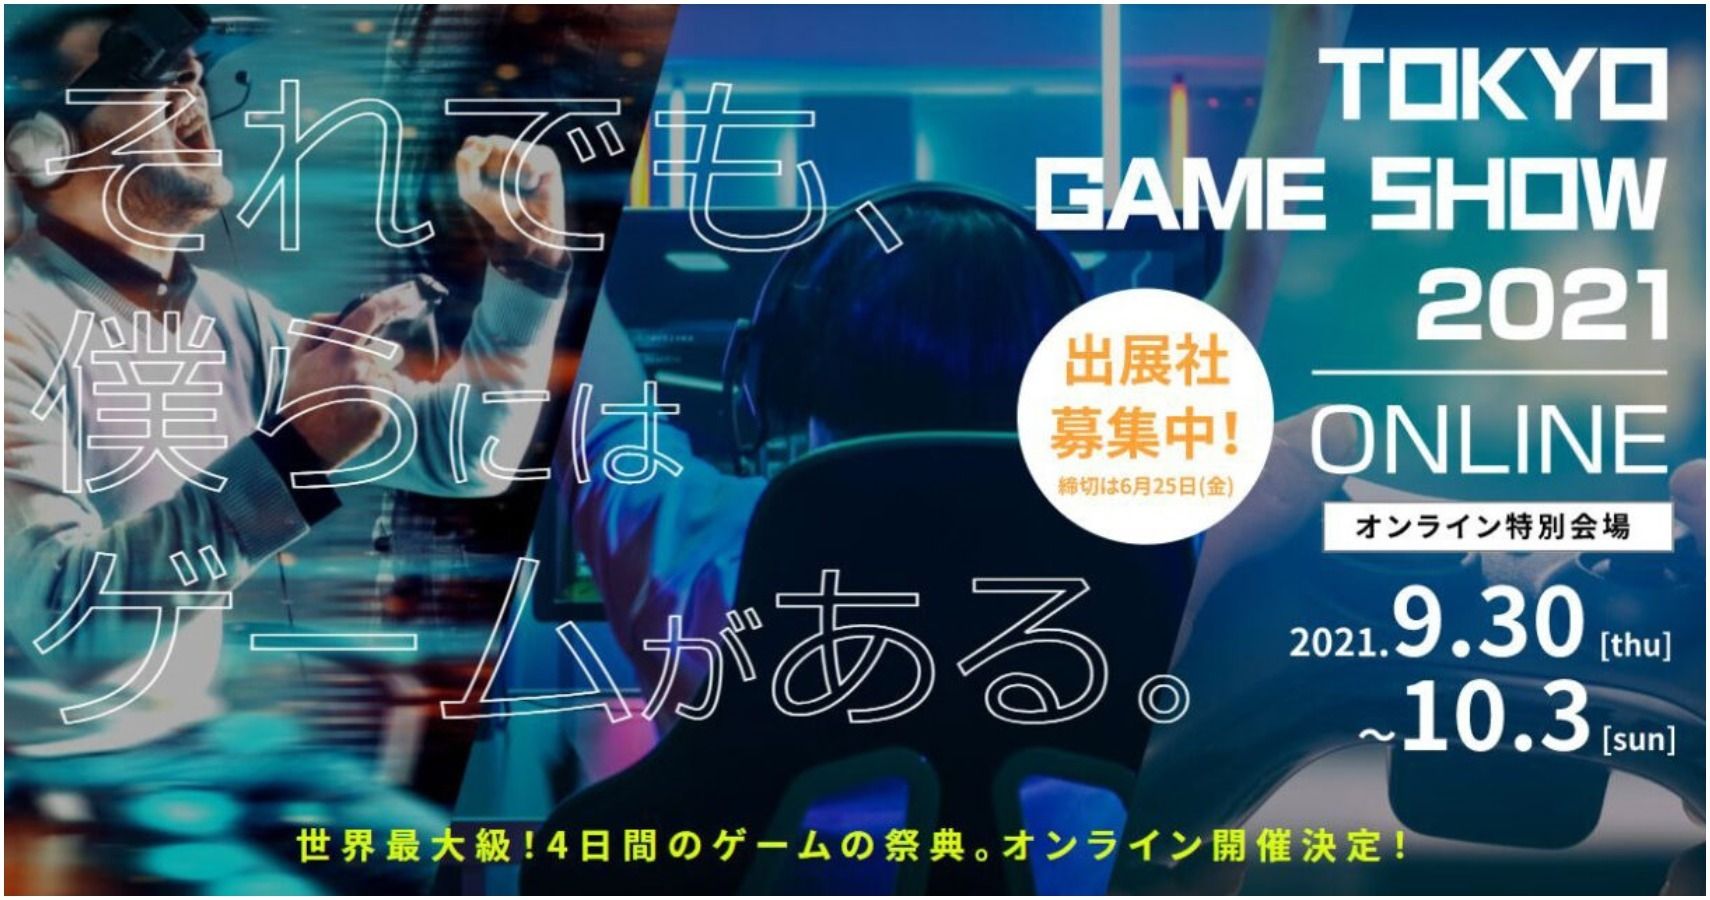 Tokyo Game Show 2021 Will Take The Showcase Online Later This Year